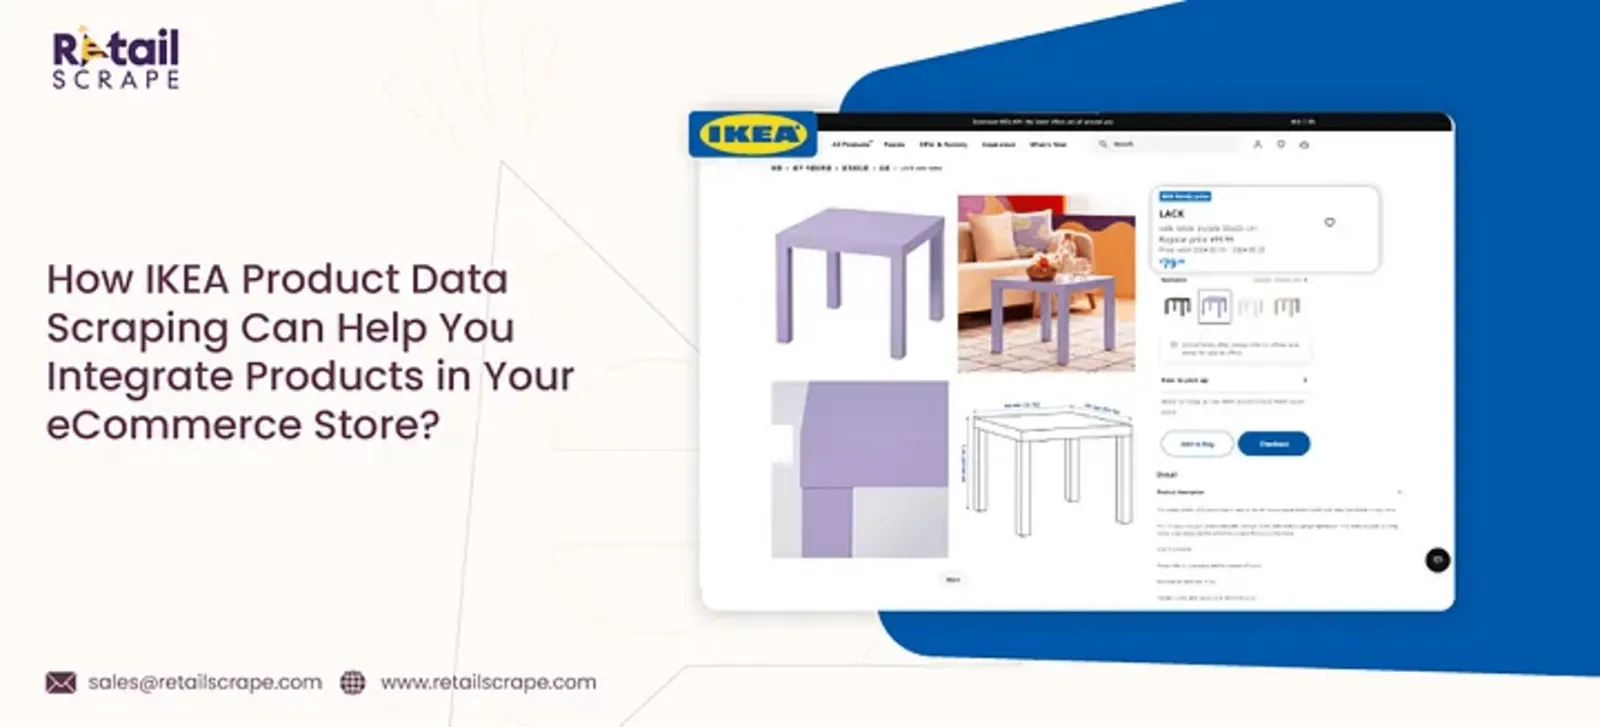 How IKEA Product Data Scraping Can Help You Integrate Products in Your eCommerce Store